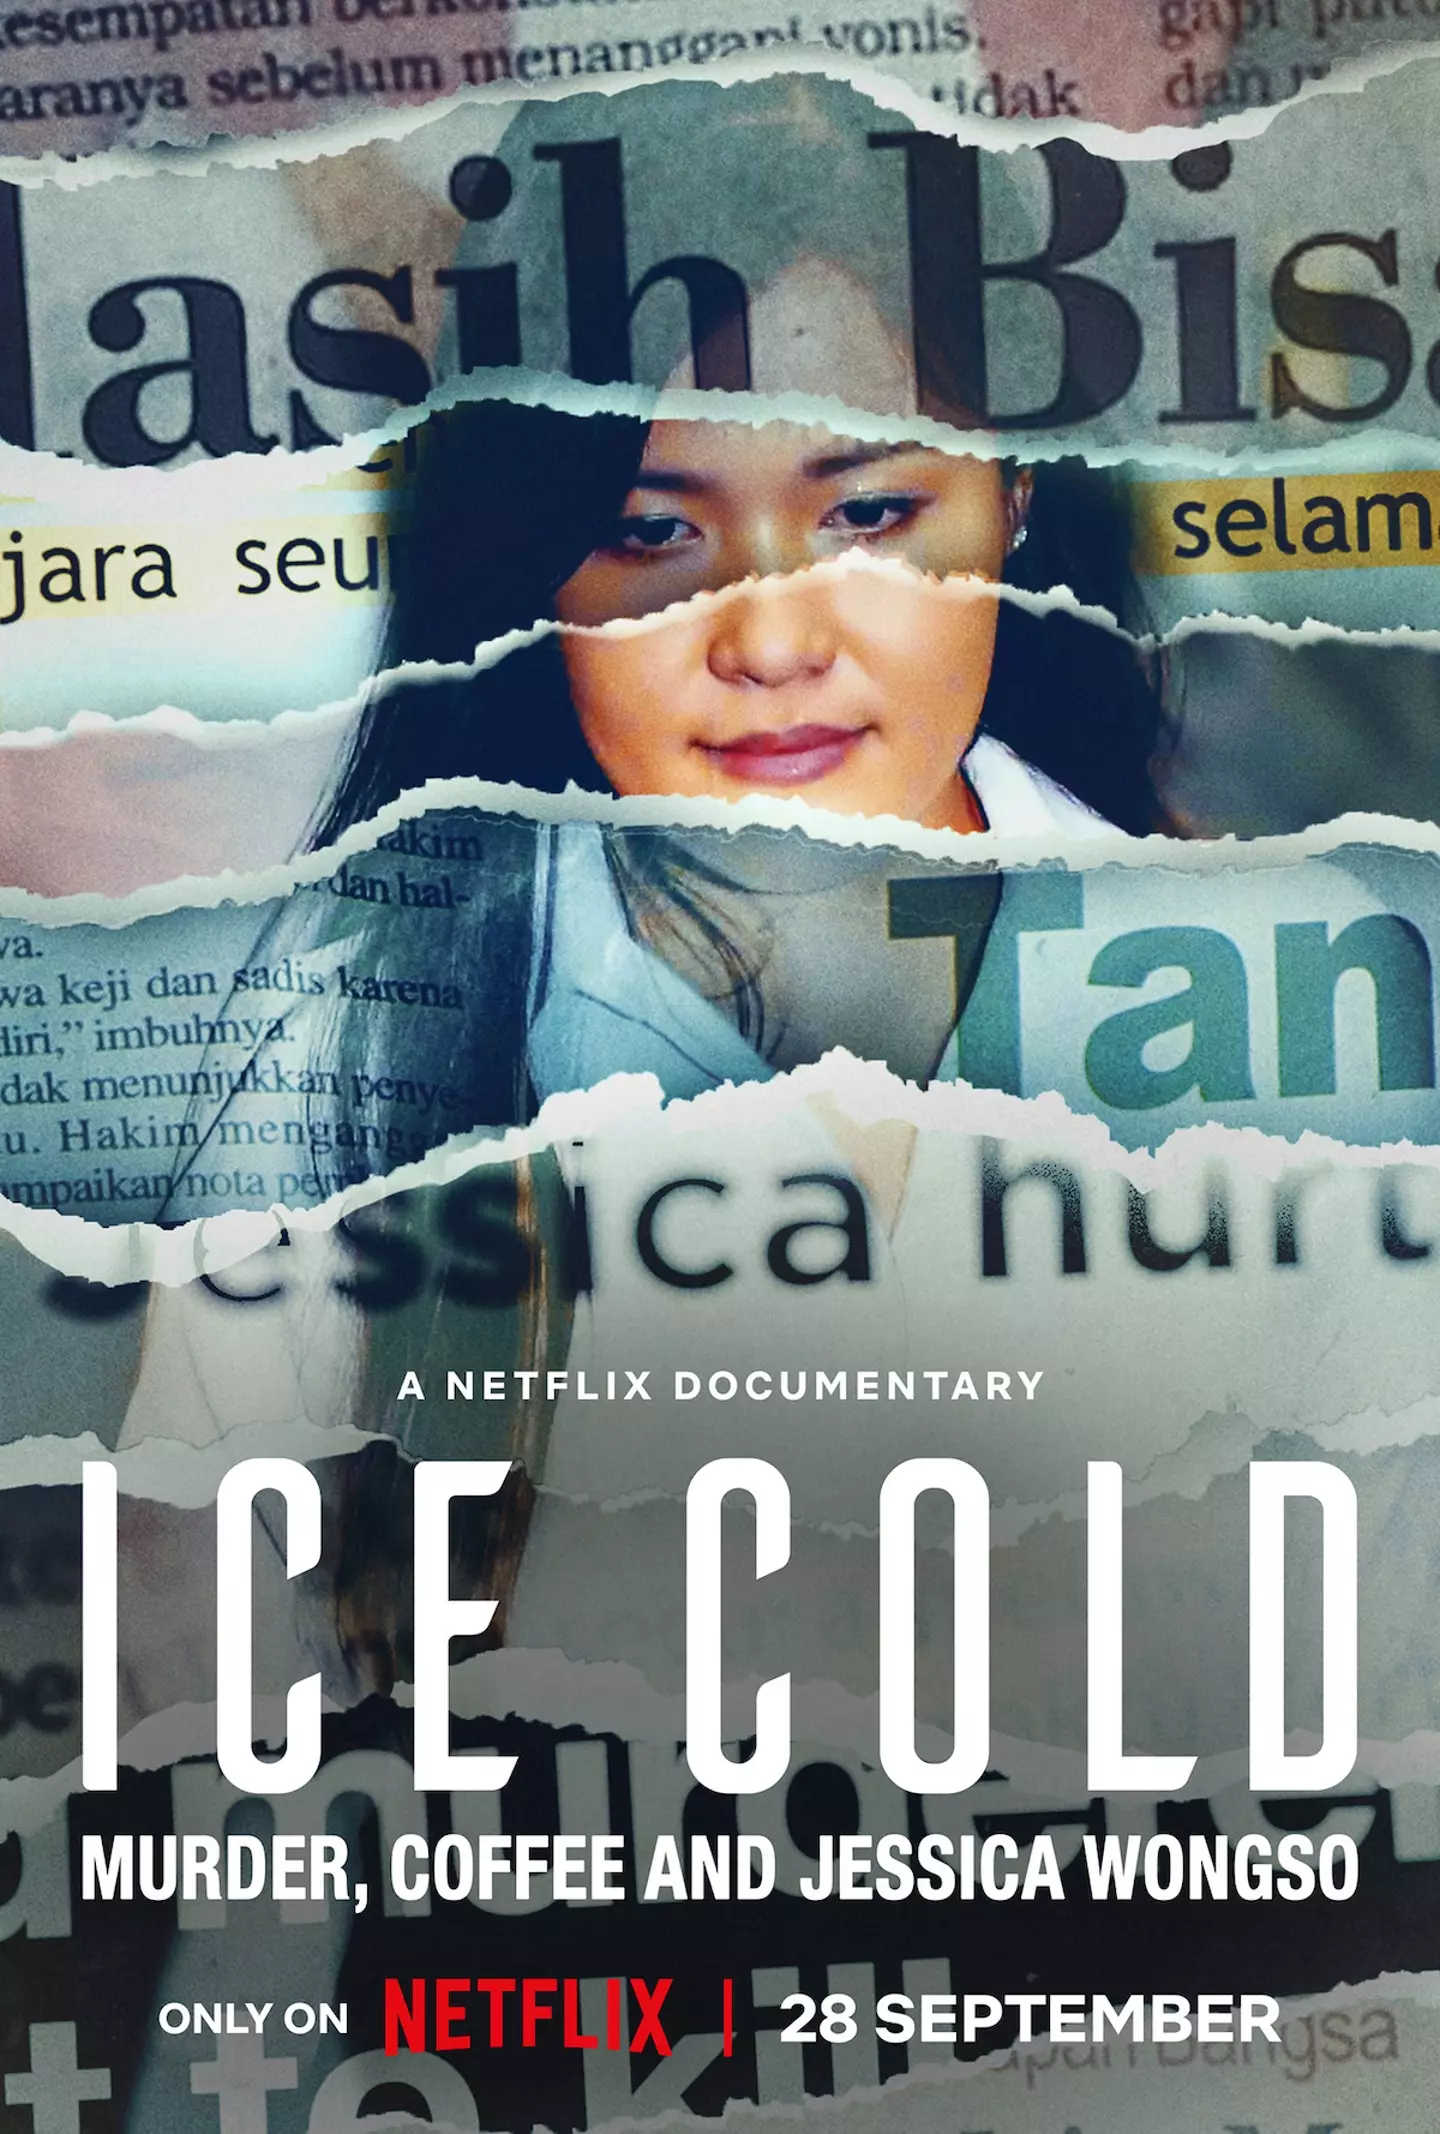 Ice Cold: Murder, Coffee and Jessica Wongso is available to stream on Netflix right now.